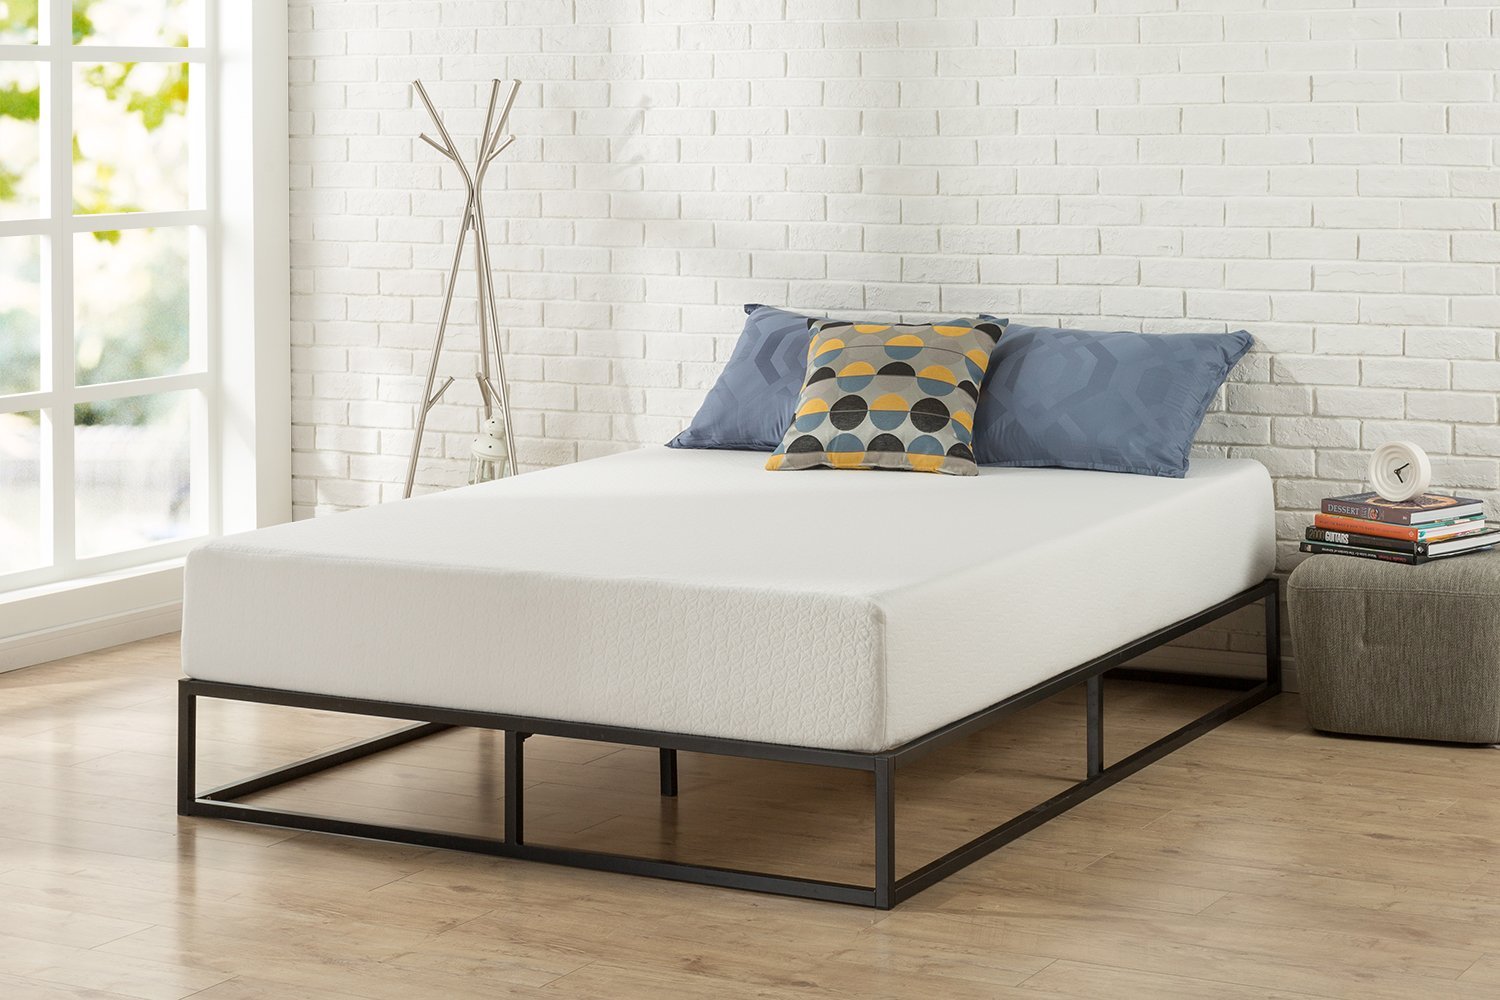 What Is A Low Profile Bed Frame